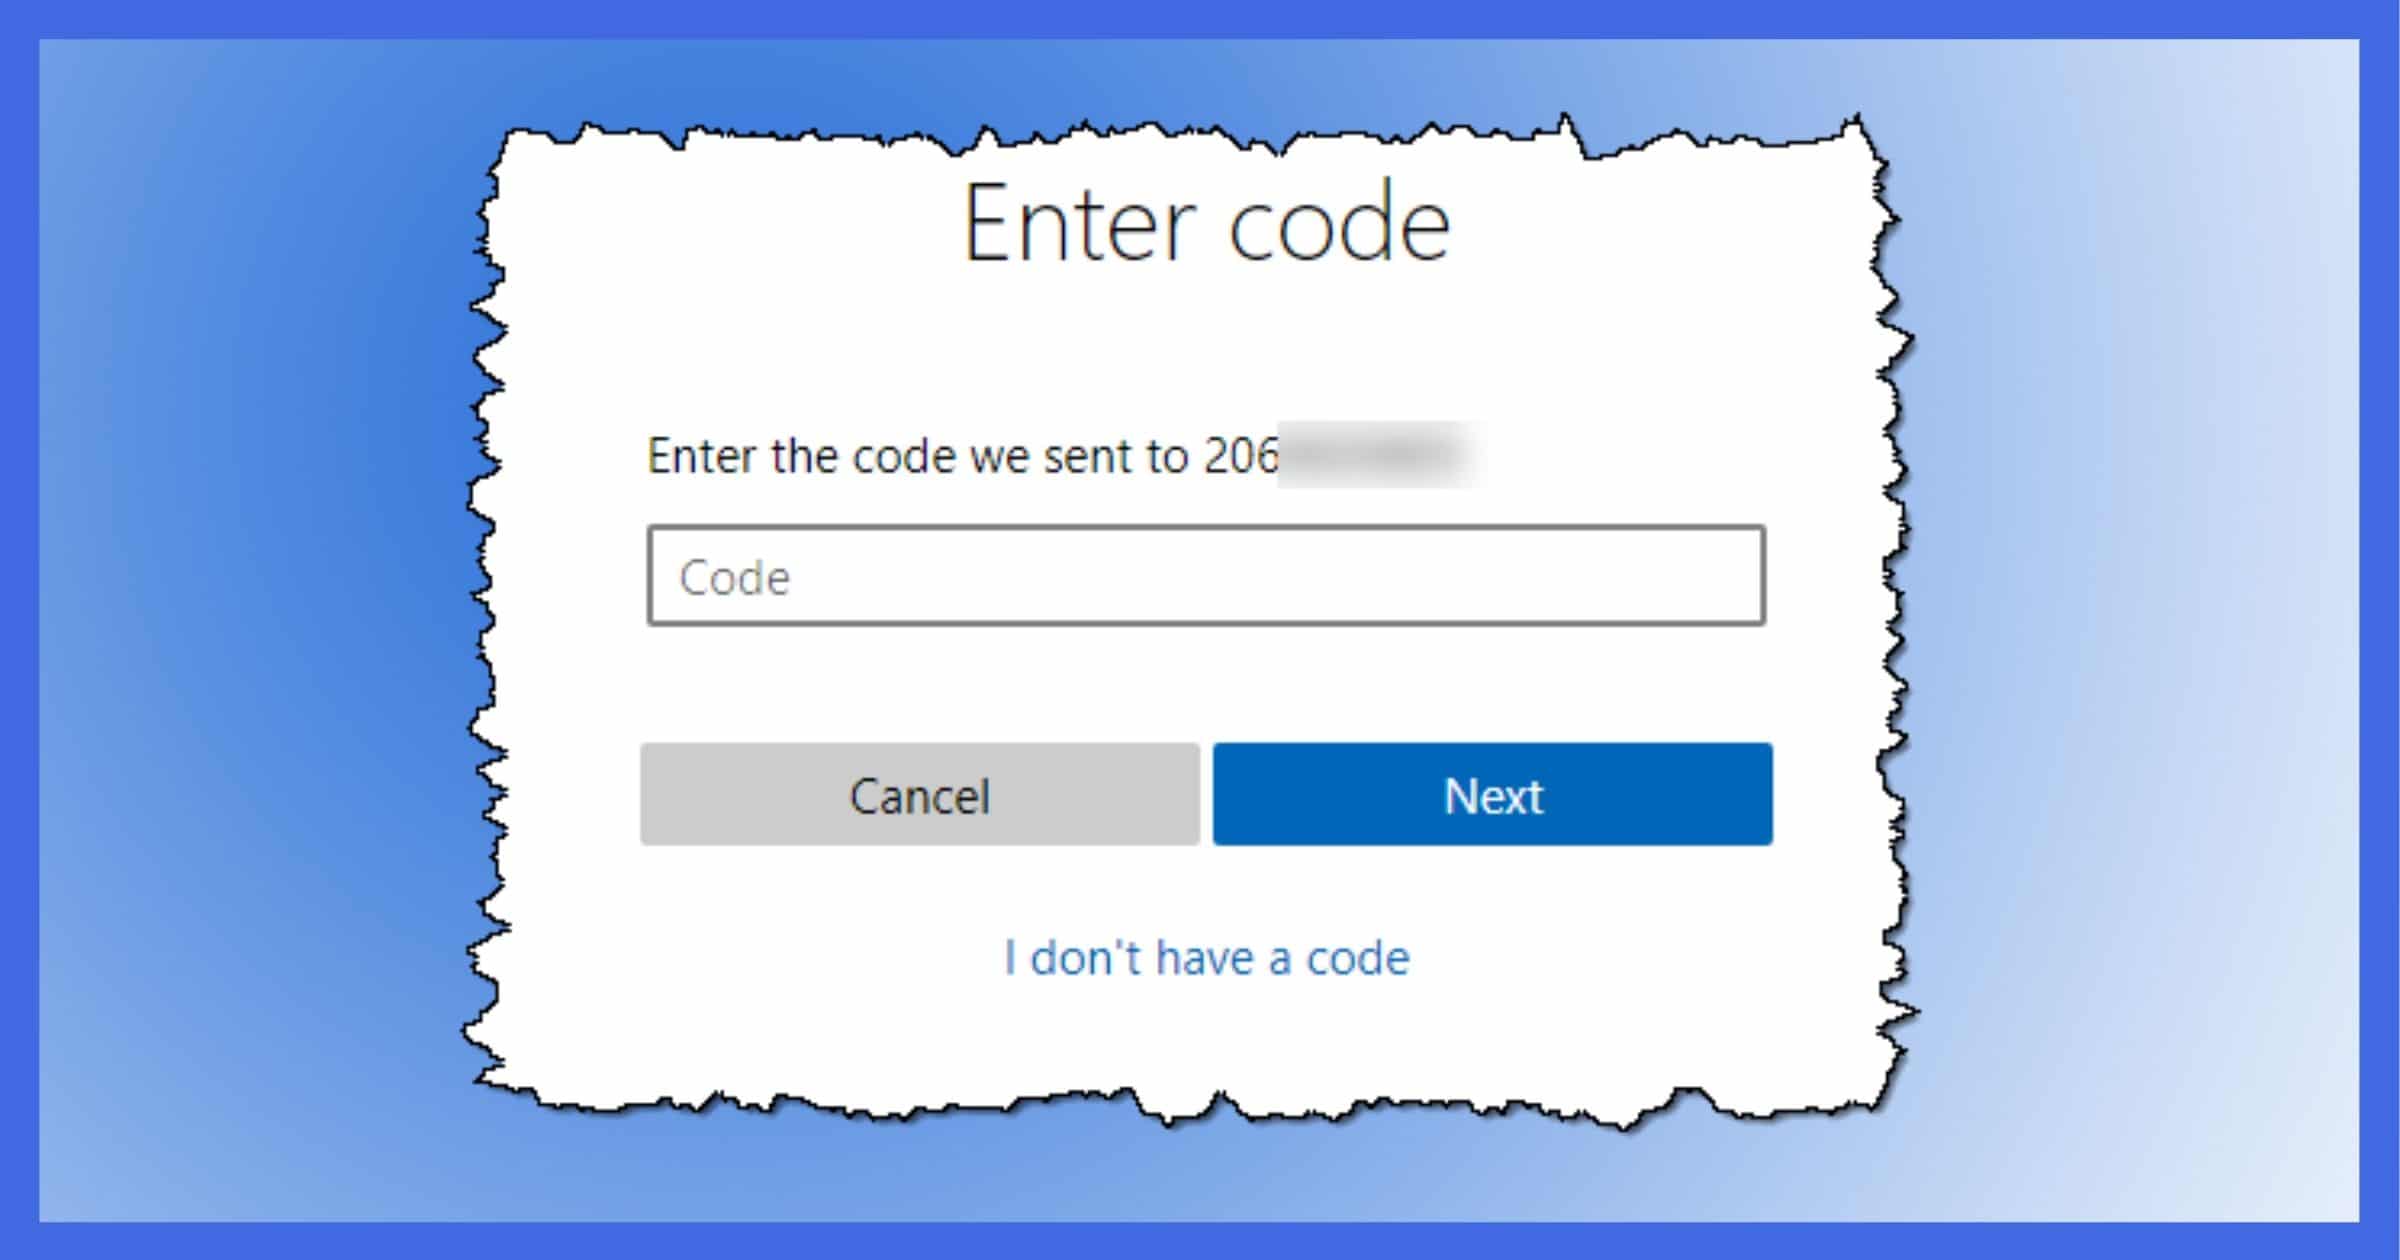 Hotmail users, login to Outlook.com for a refreshing new look!